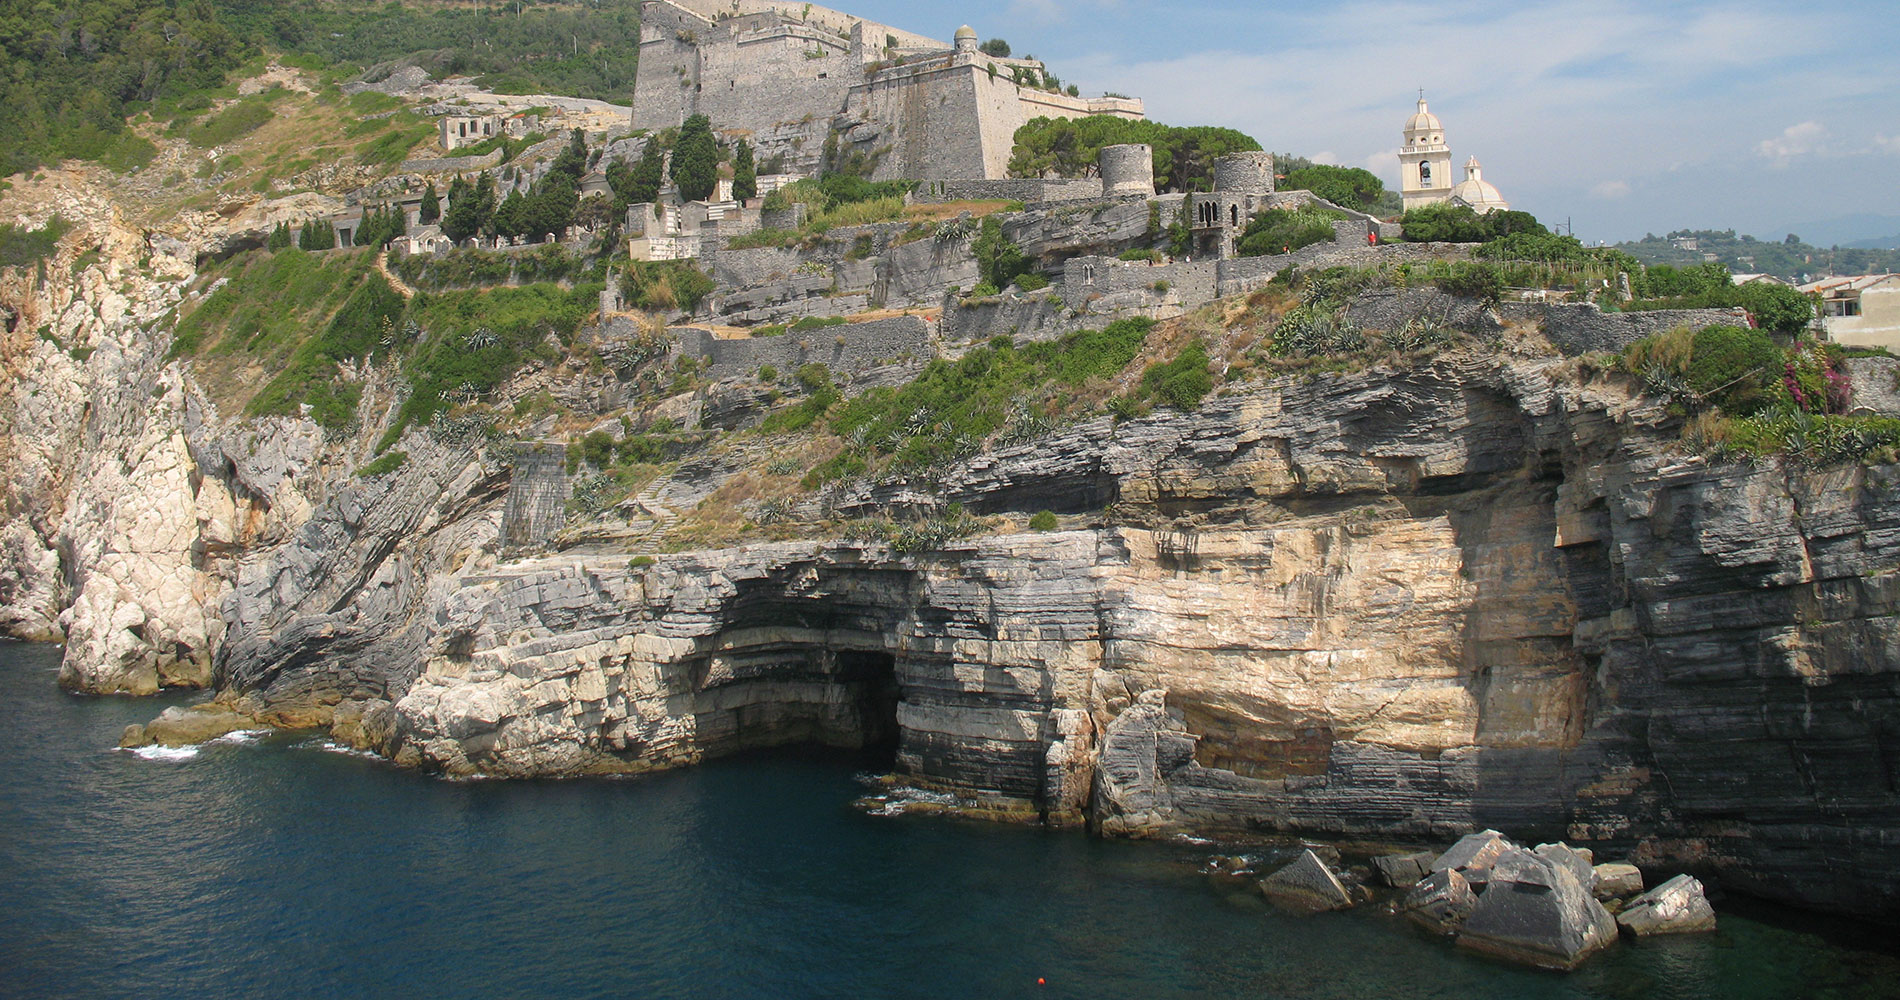 Grotta Byron, the marine cave located between Punta San Pietro and the Doria Castle